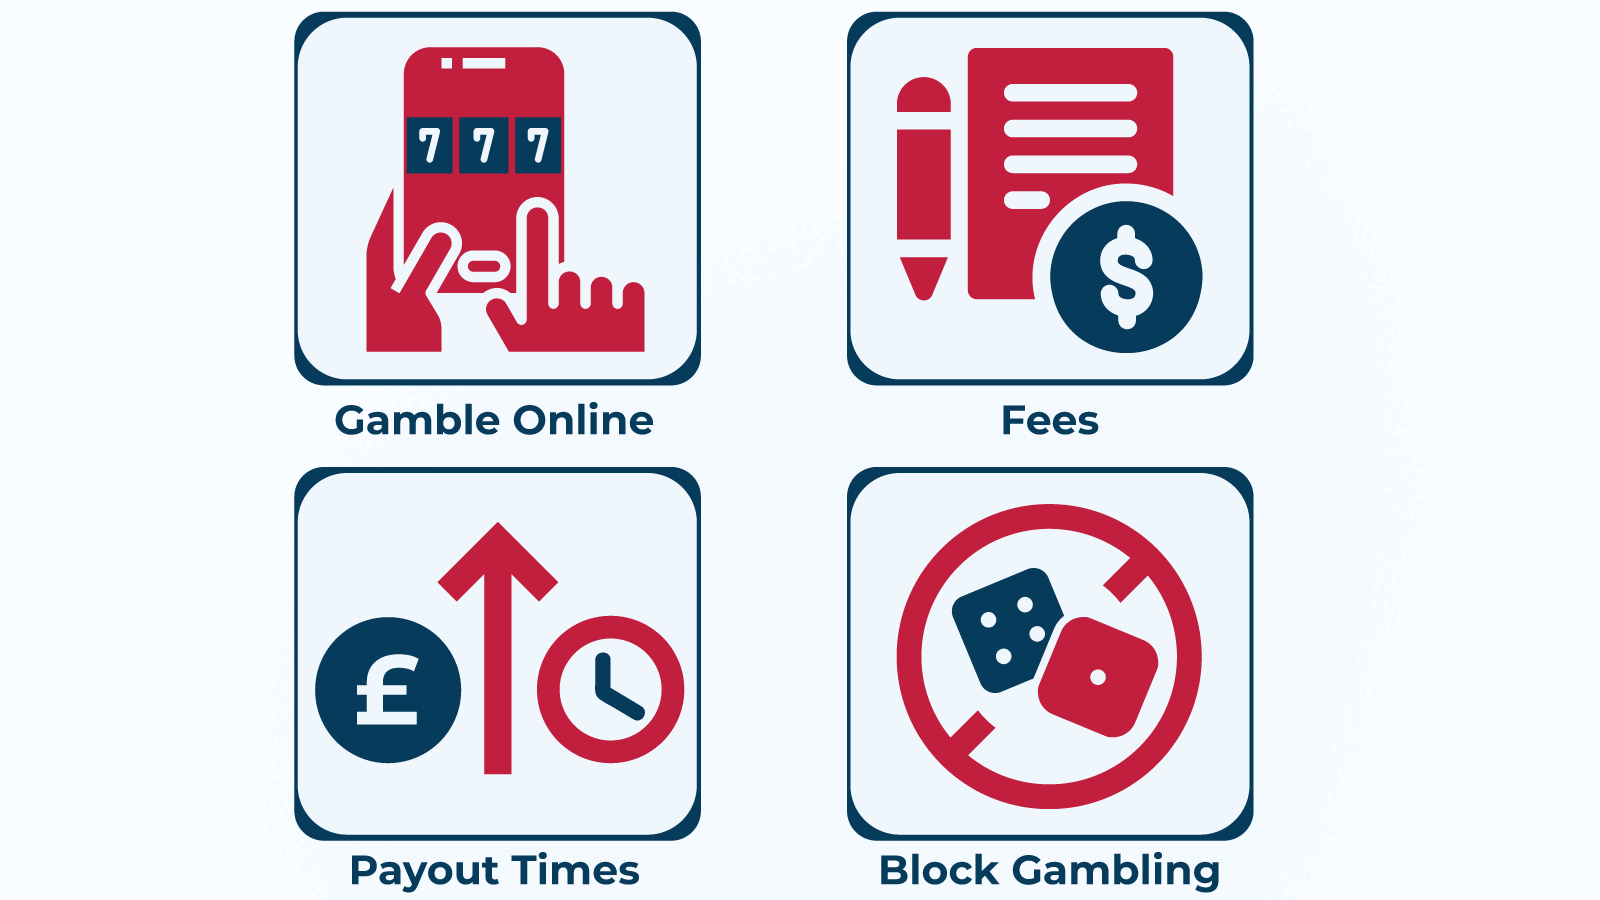 How PayPal Works for Gambling